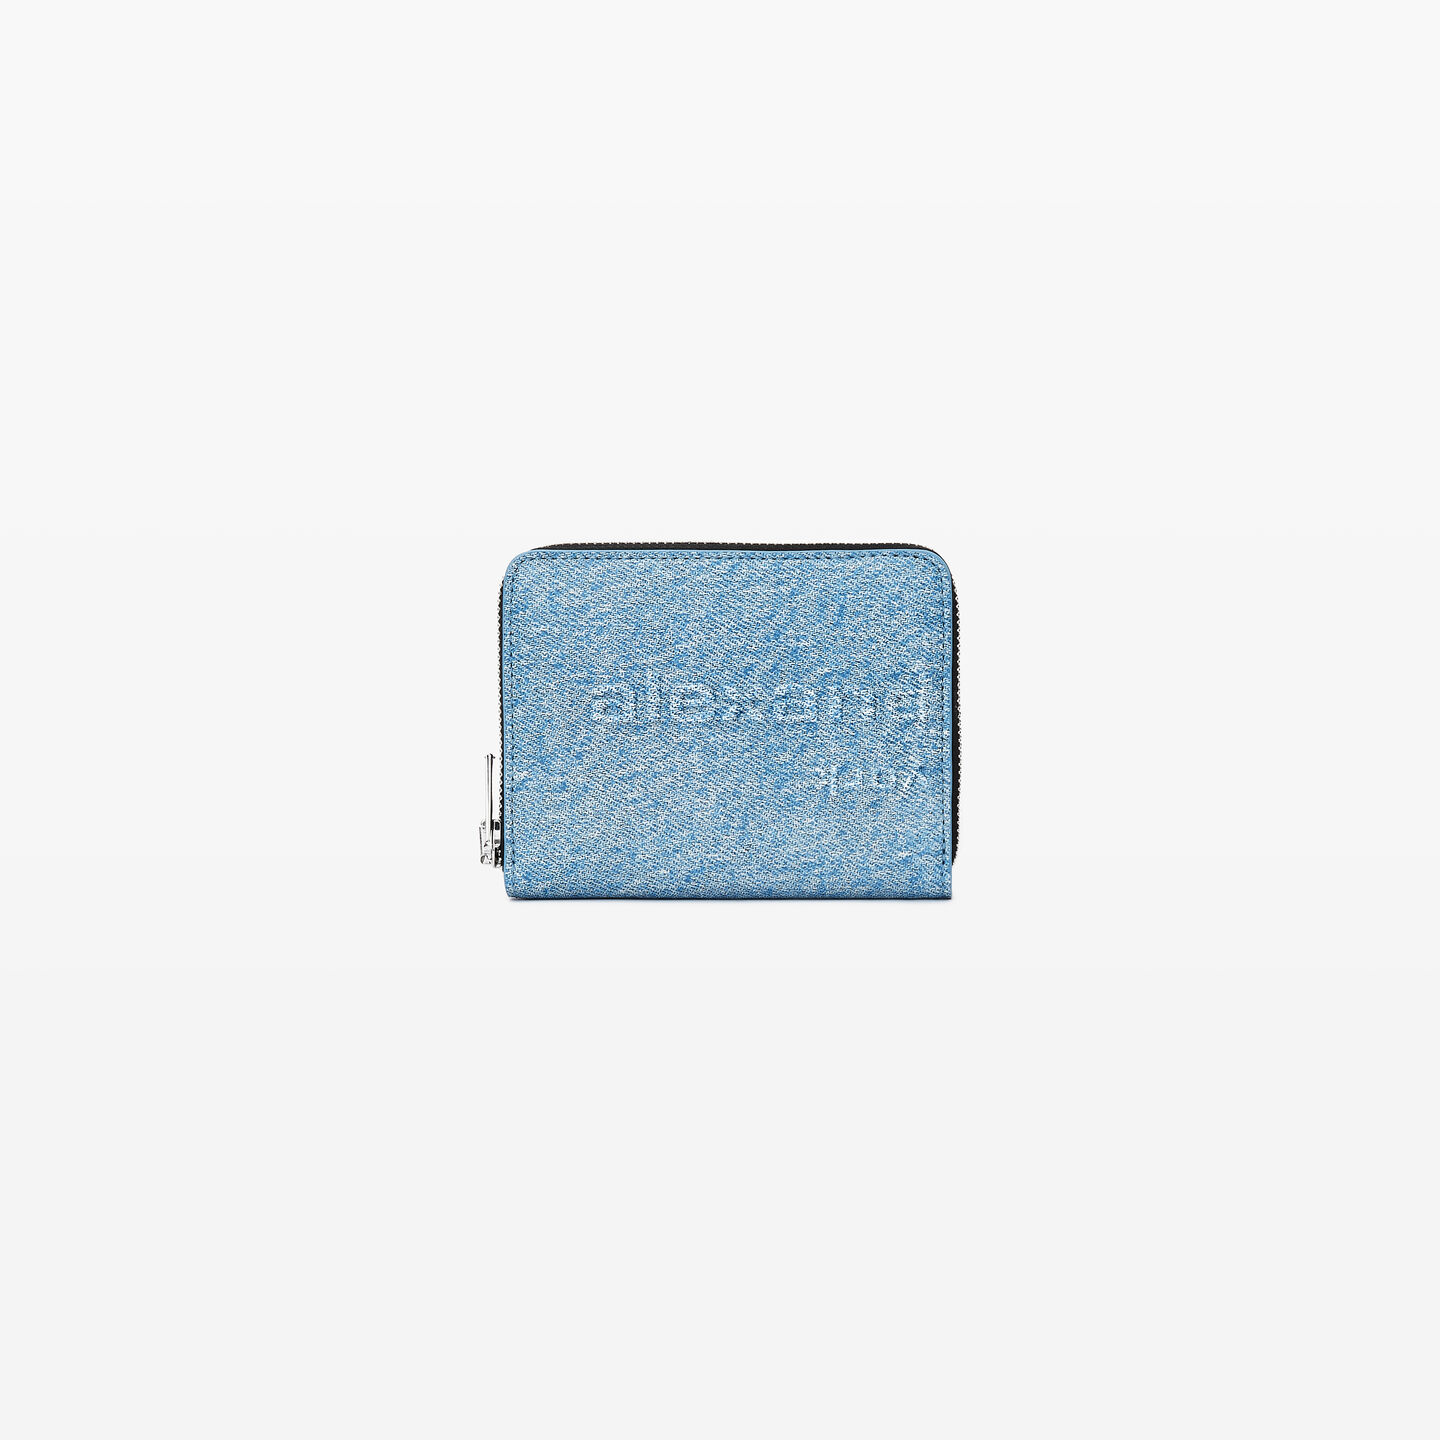 Alexander Wang Punch Compact Wallet In Crackle Patent Leather In Vintage Medium Indigo